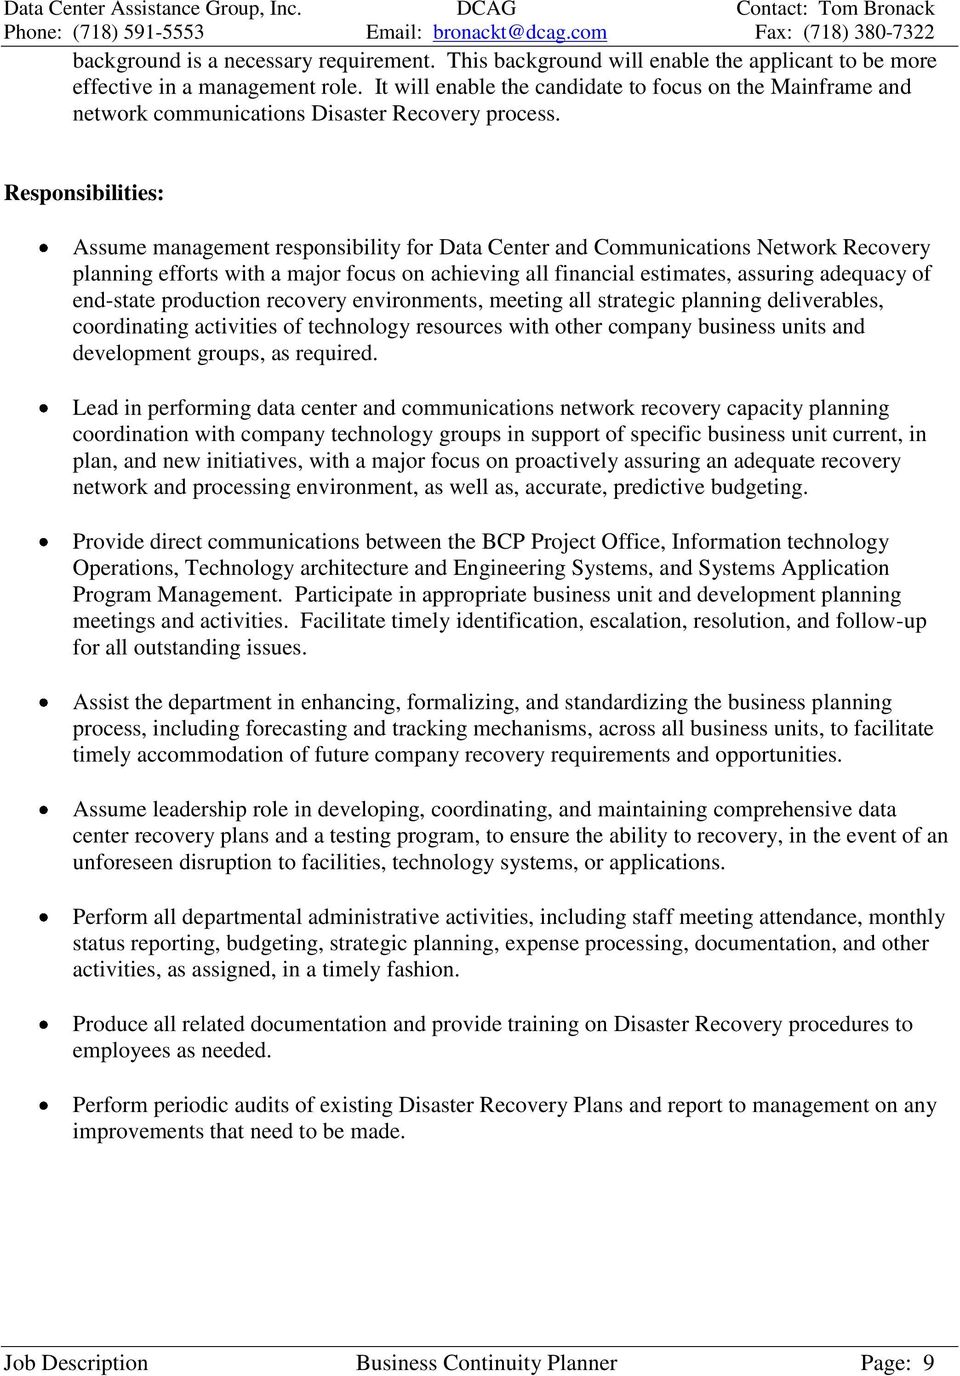 Responsibilities: Assume management responsibility for Data Center and Communications Network Recovery planning efforts with a major focus on achieving all financial estimates, assuring adequacy of